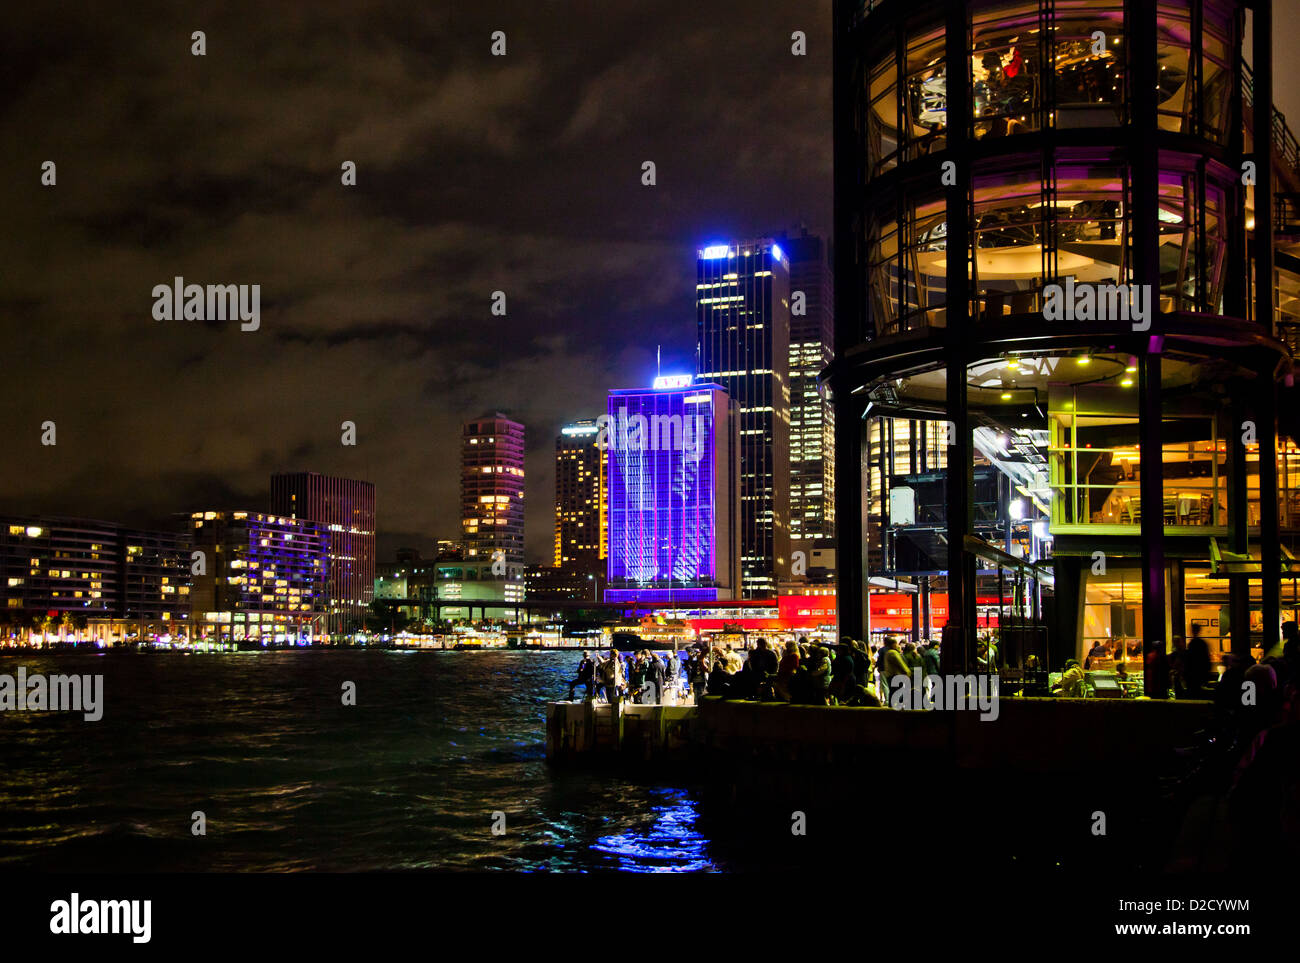 Australia, New South Wales, Sydney Opera House, night view of Circular Quay and the Overseas Passenger Terminal Stock Photo